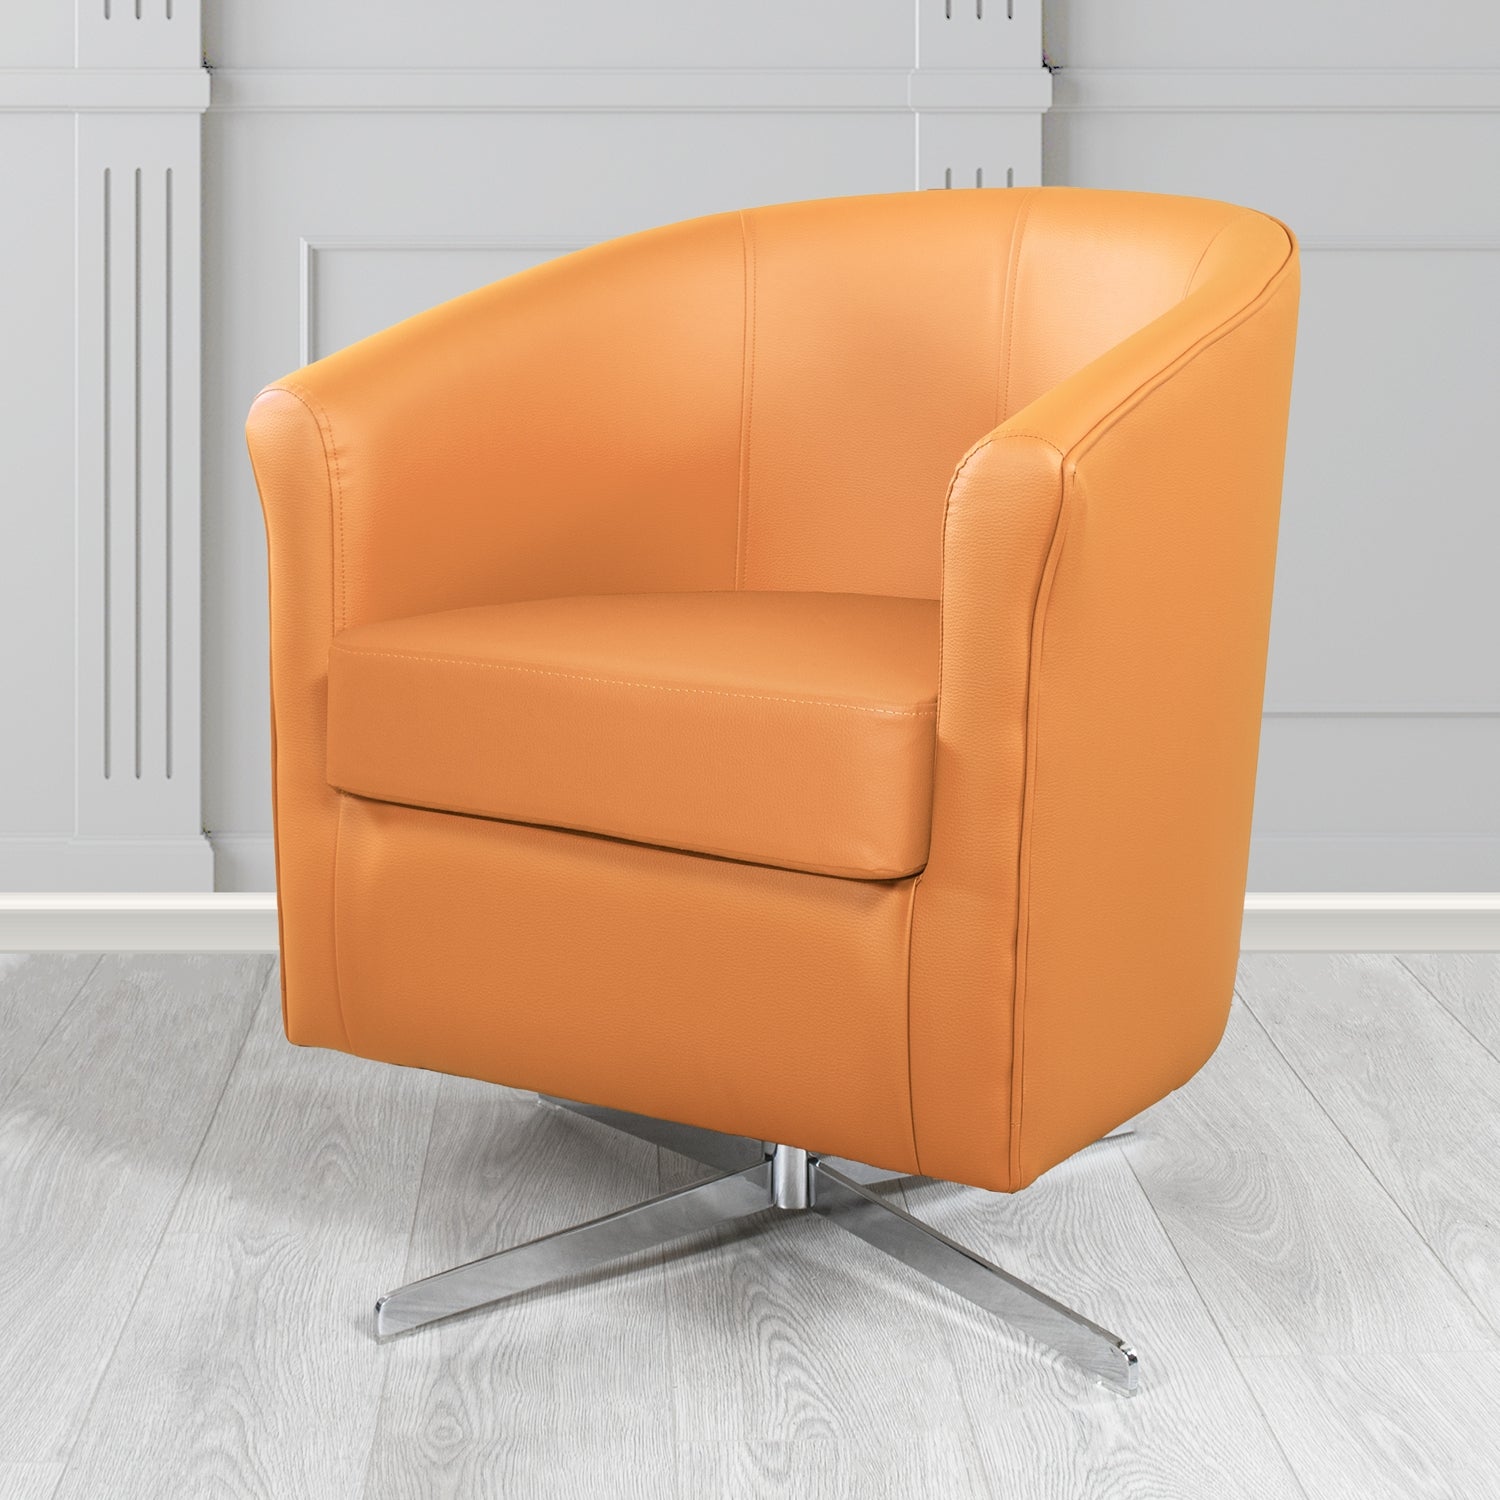 Cannes Swivel Tub Chair in Just Colour Tangerine Crib 5 Faux Leather - The Tub Chair Shop